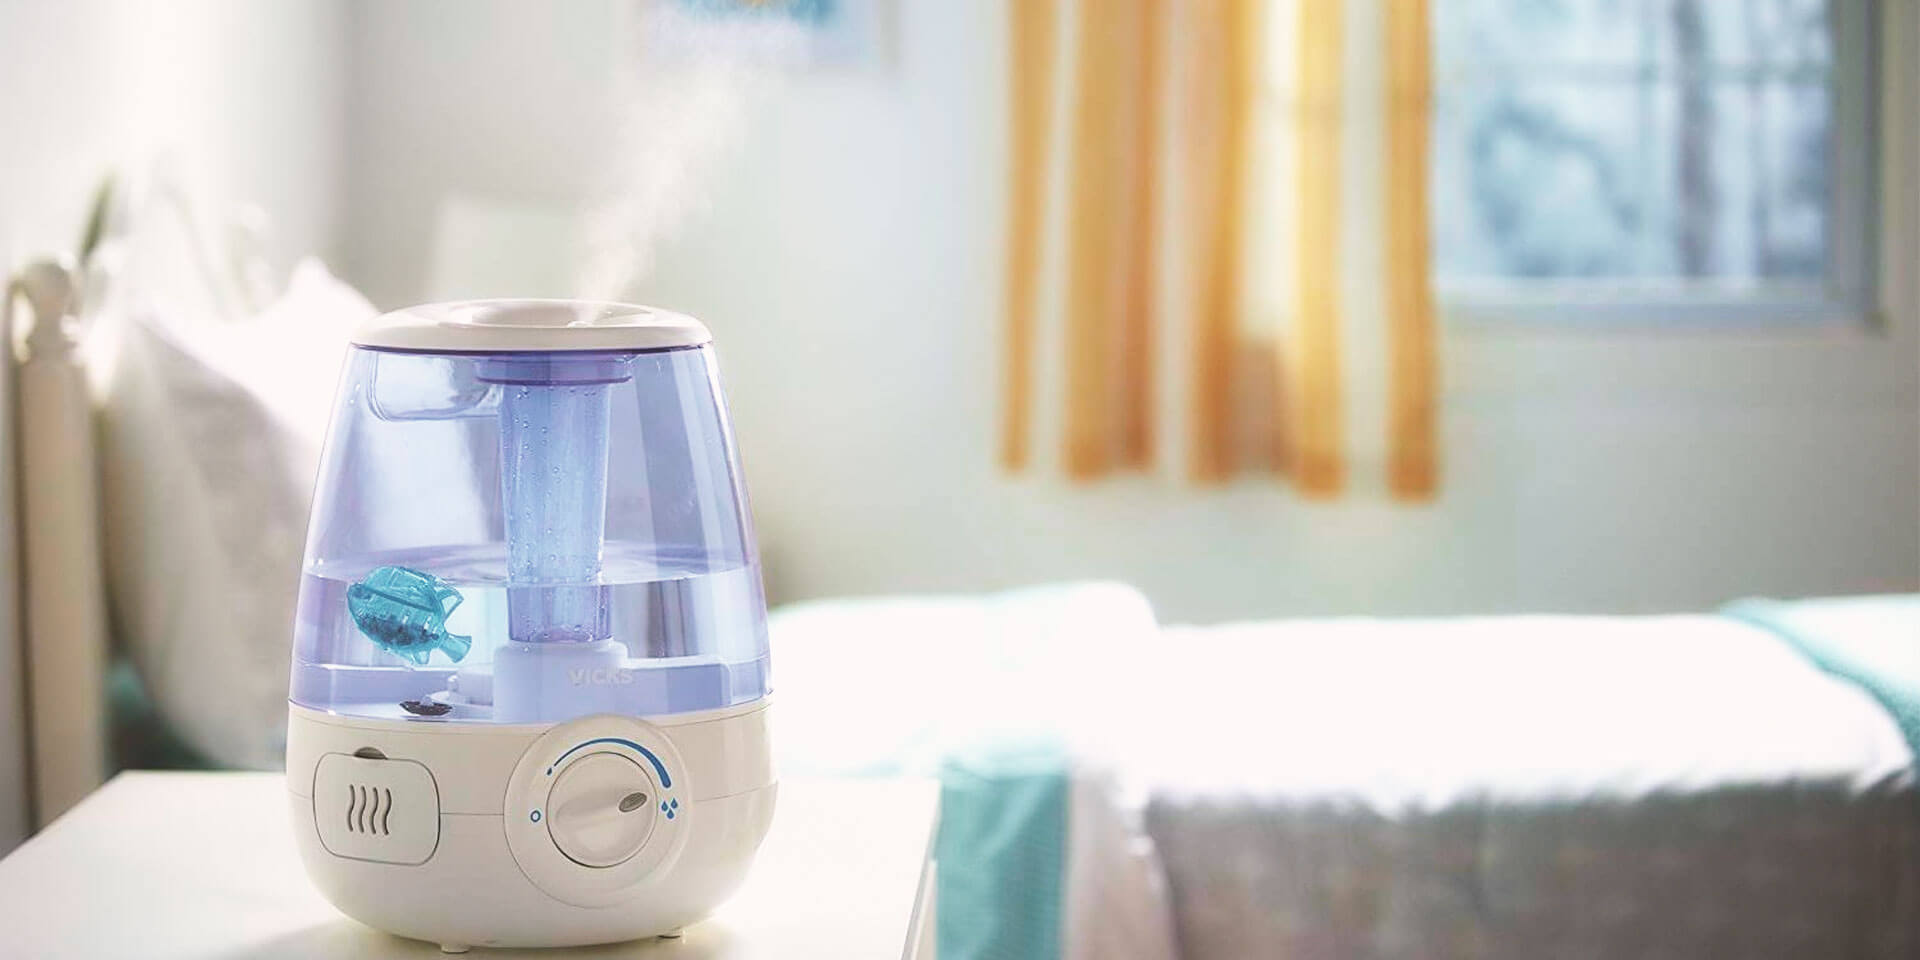 What type of humidifier is best for winter?